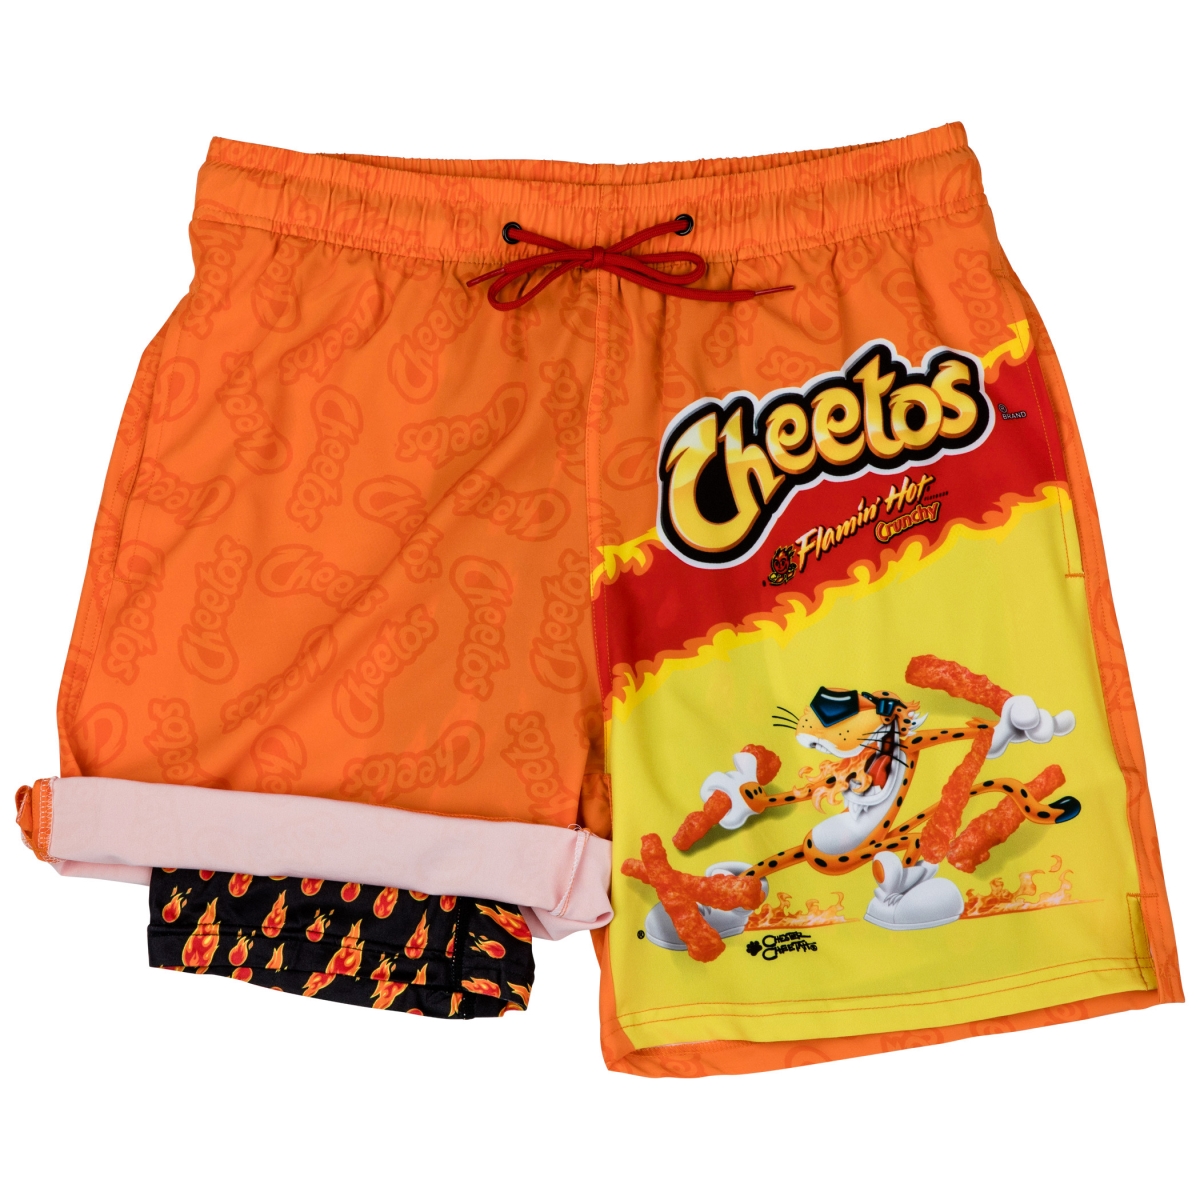 866842-xlarge-40 Flaming Hot Cheetos Bag 6 in. Inseam Lined Swim Trunks, Orange - Extra Large - 40-42 -  Pop Culture, 866842-xlarge(40